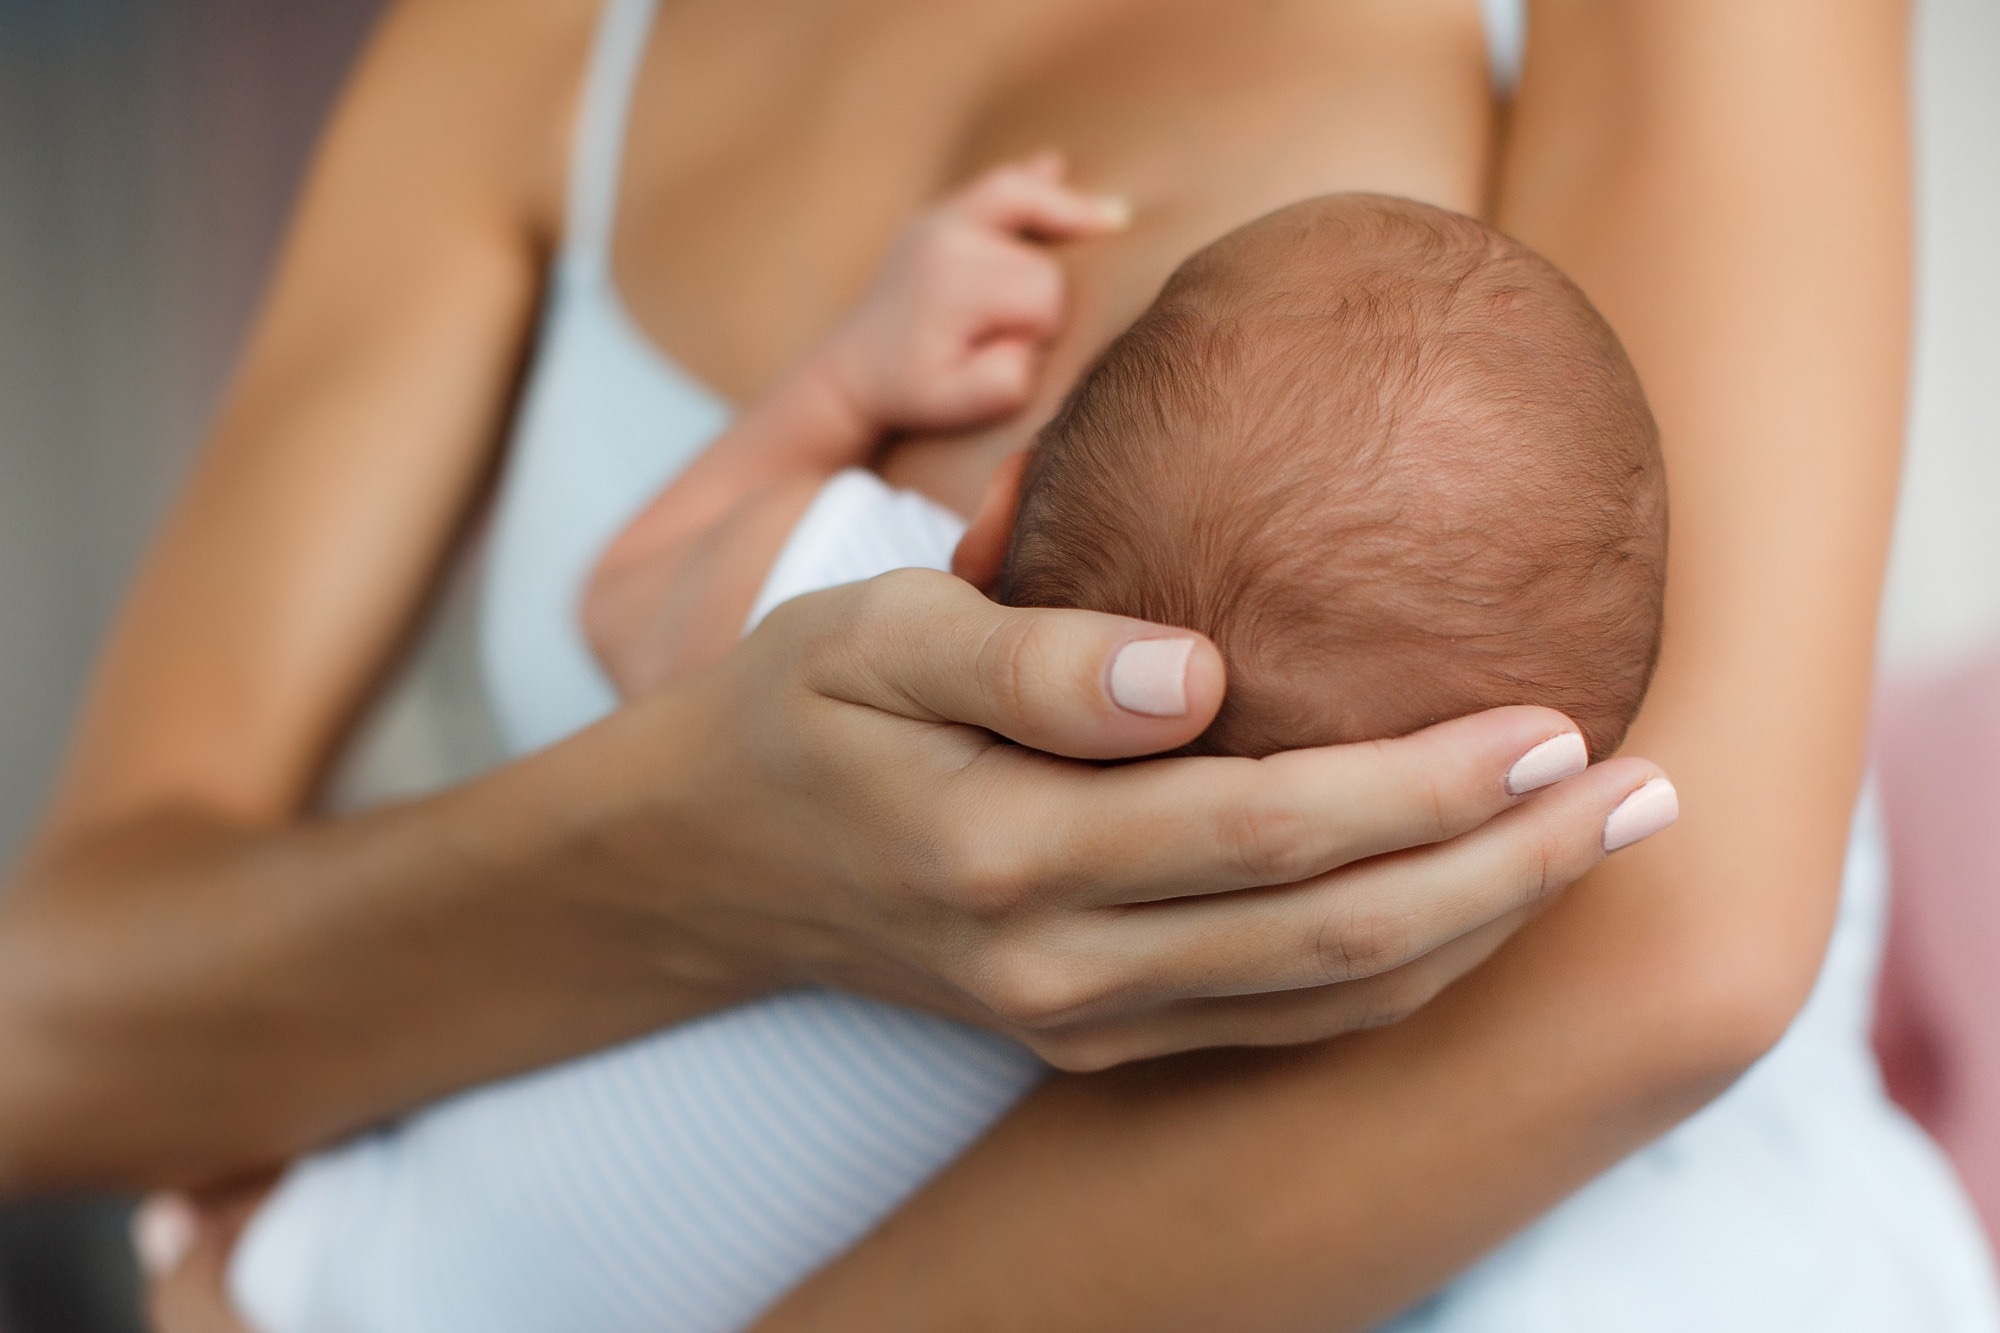 Review: Human milk macronutrients and child growth and body composition in the first 2 years: a systematic review. Image Credit: HTeam / Shutterstock